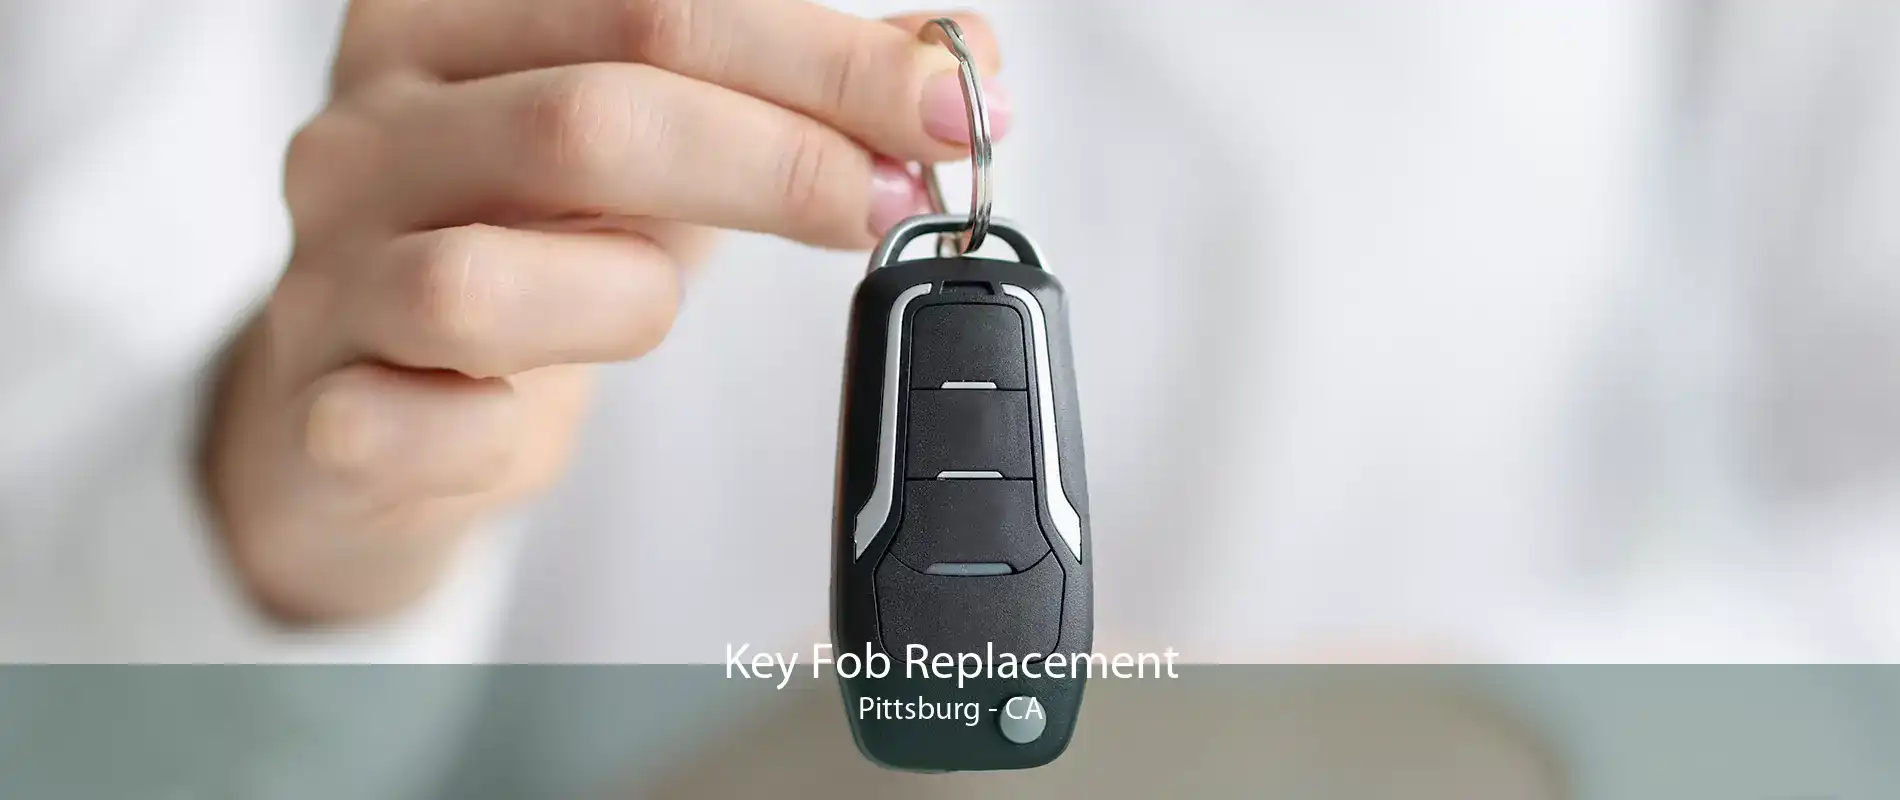 Key Fob Replacement Pittsburg - CA